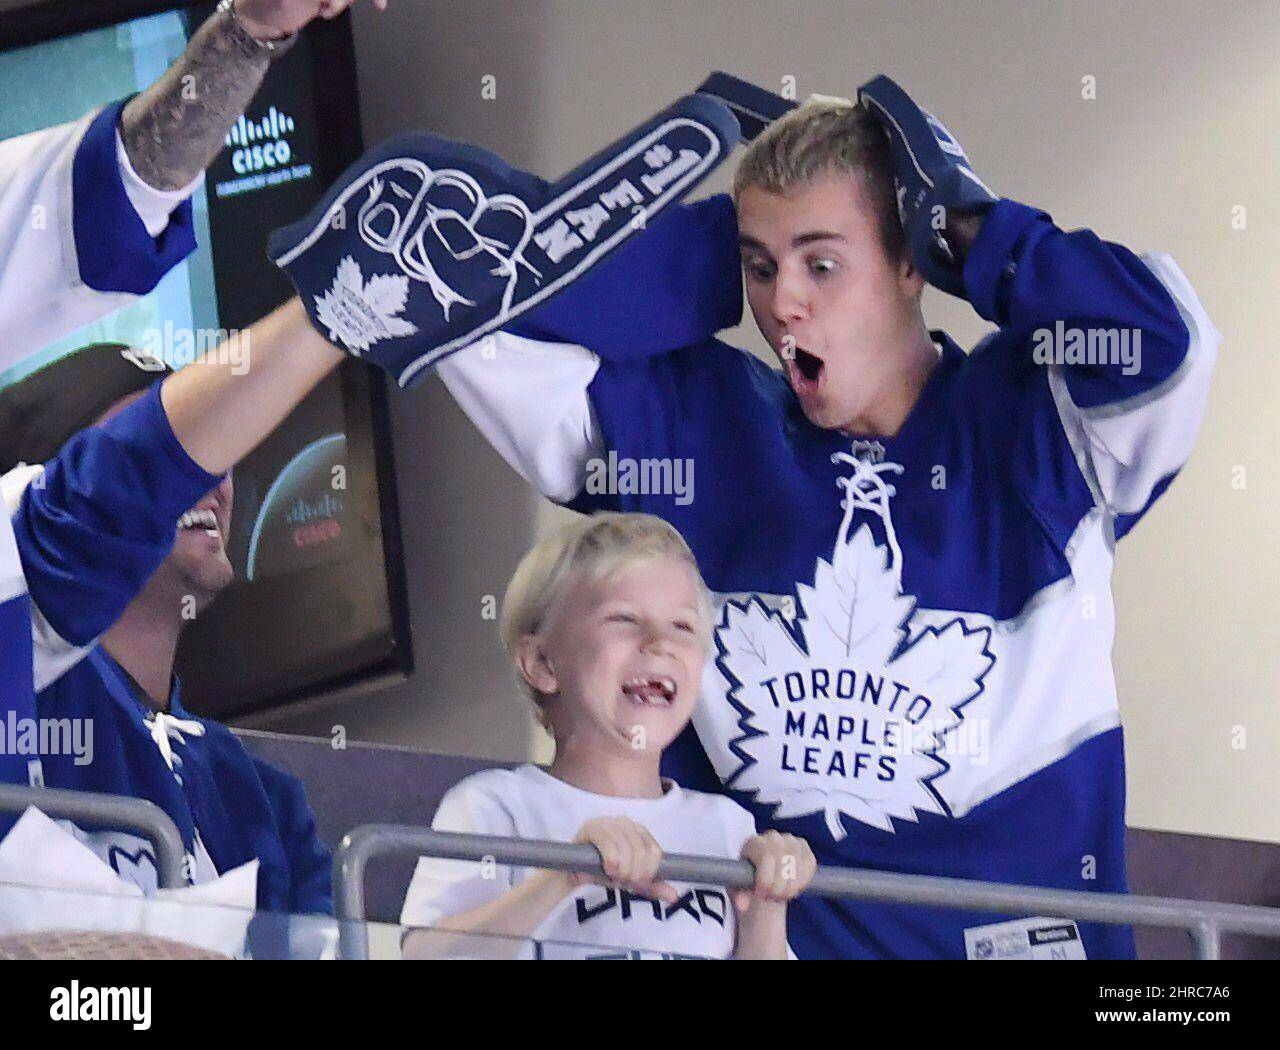 SEE IT: Justin Bieber has to be held back from fighting during hockey game  – New York Daily News